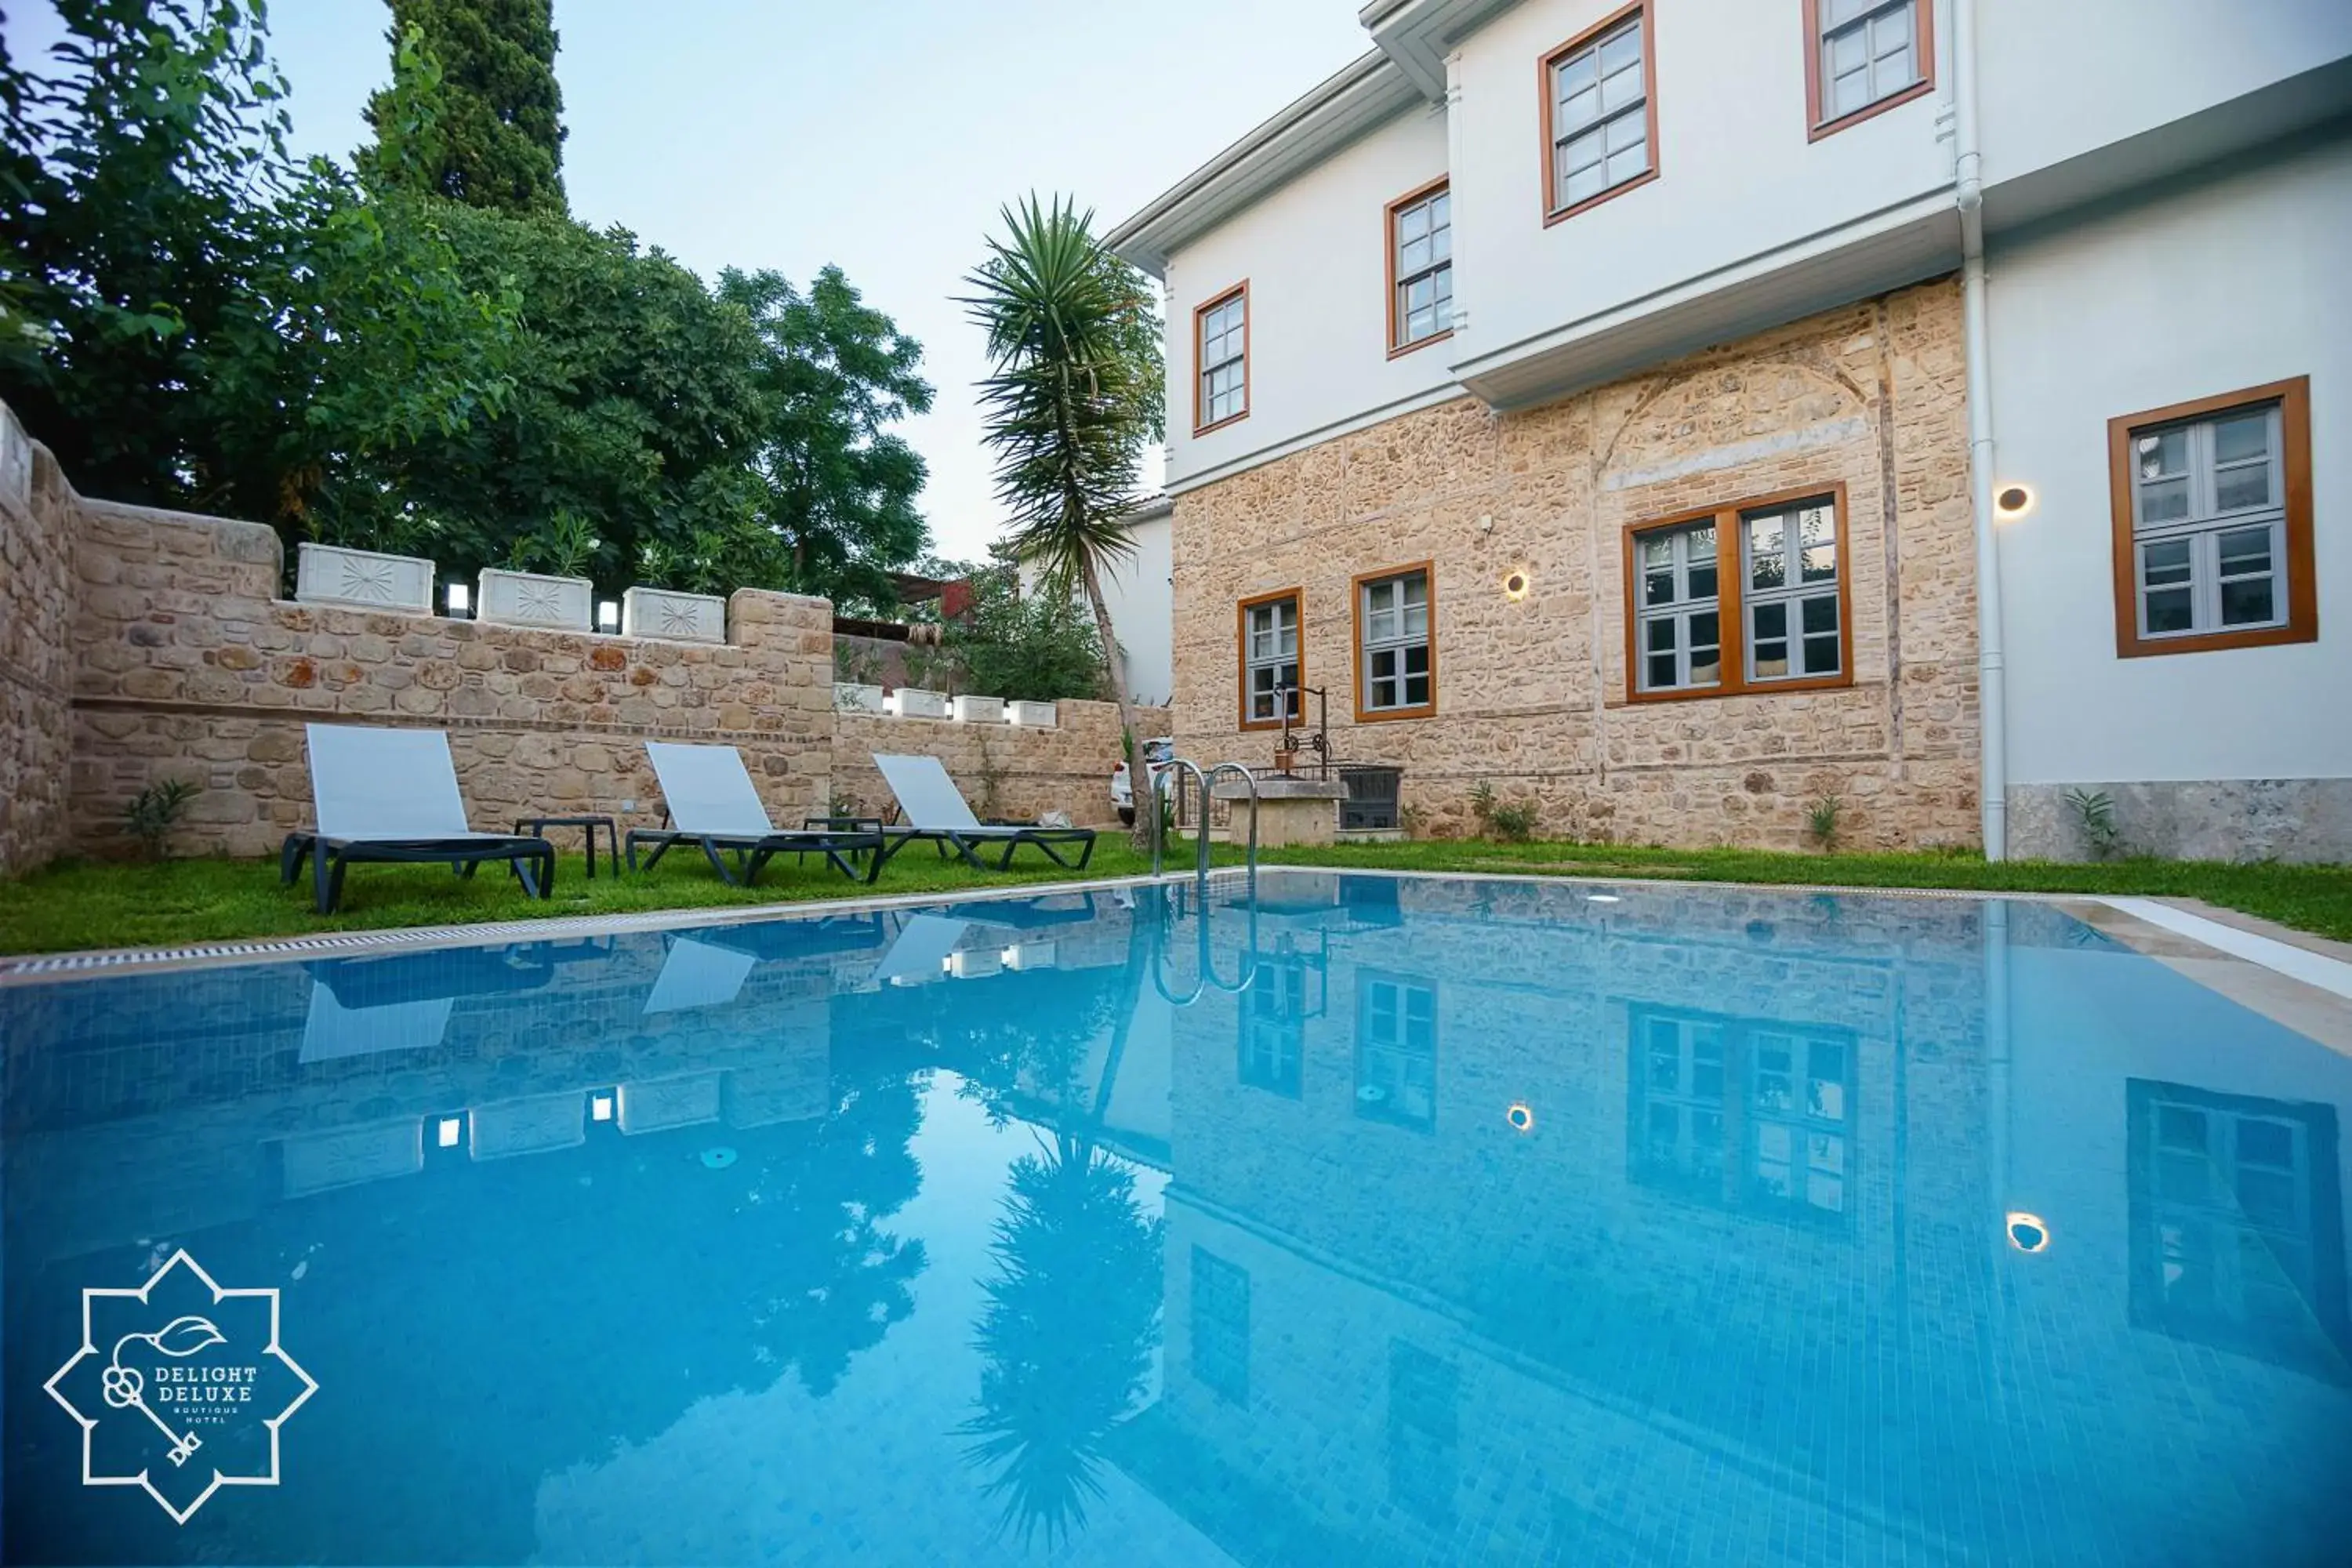 Swimming Pool in Delight Deluxe Boutique Hotel